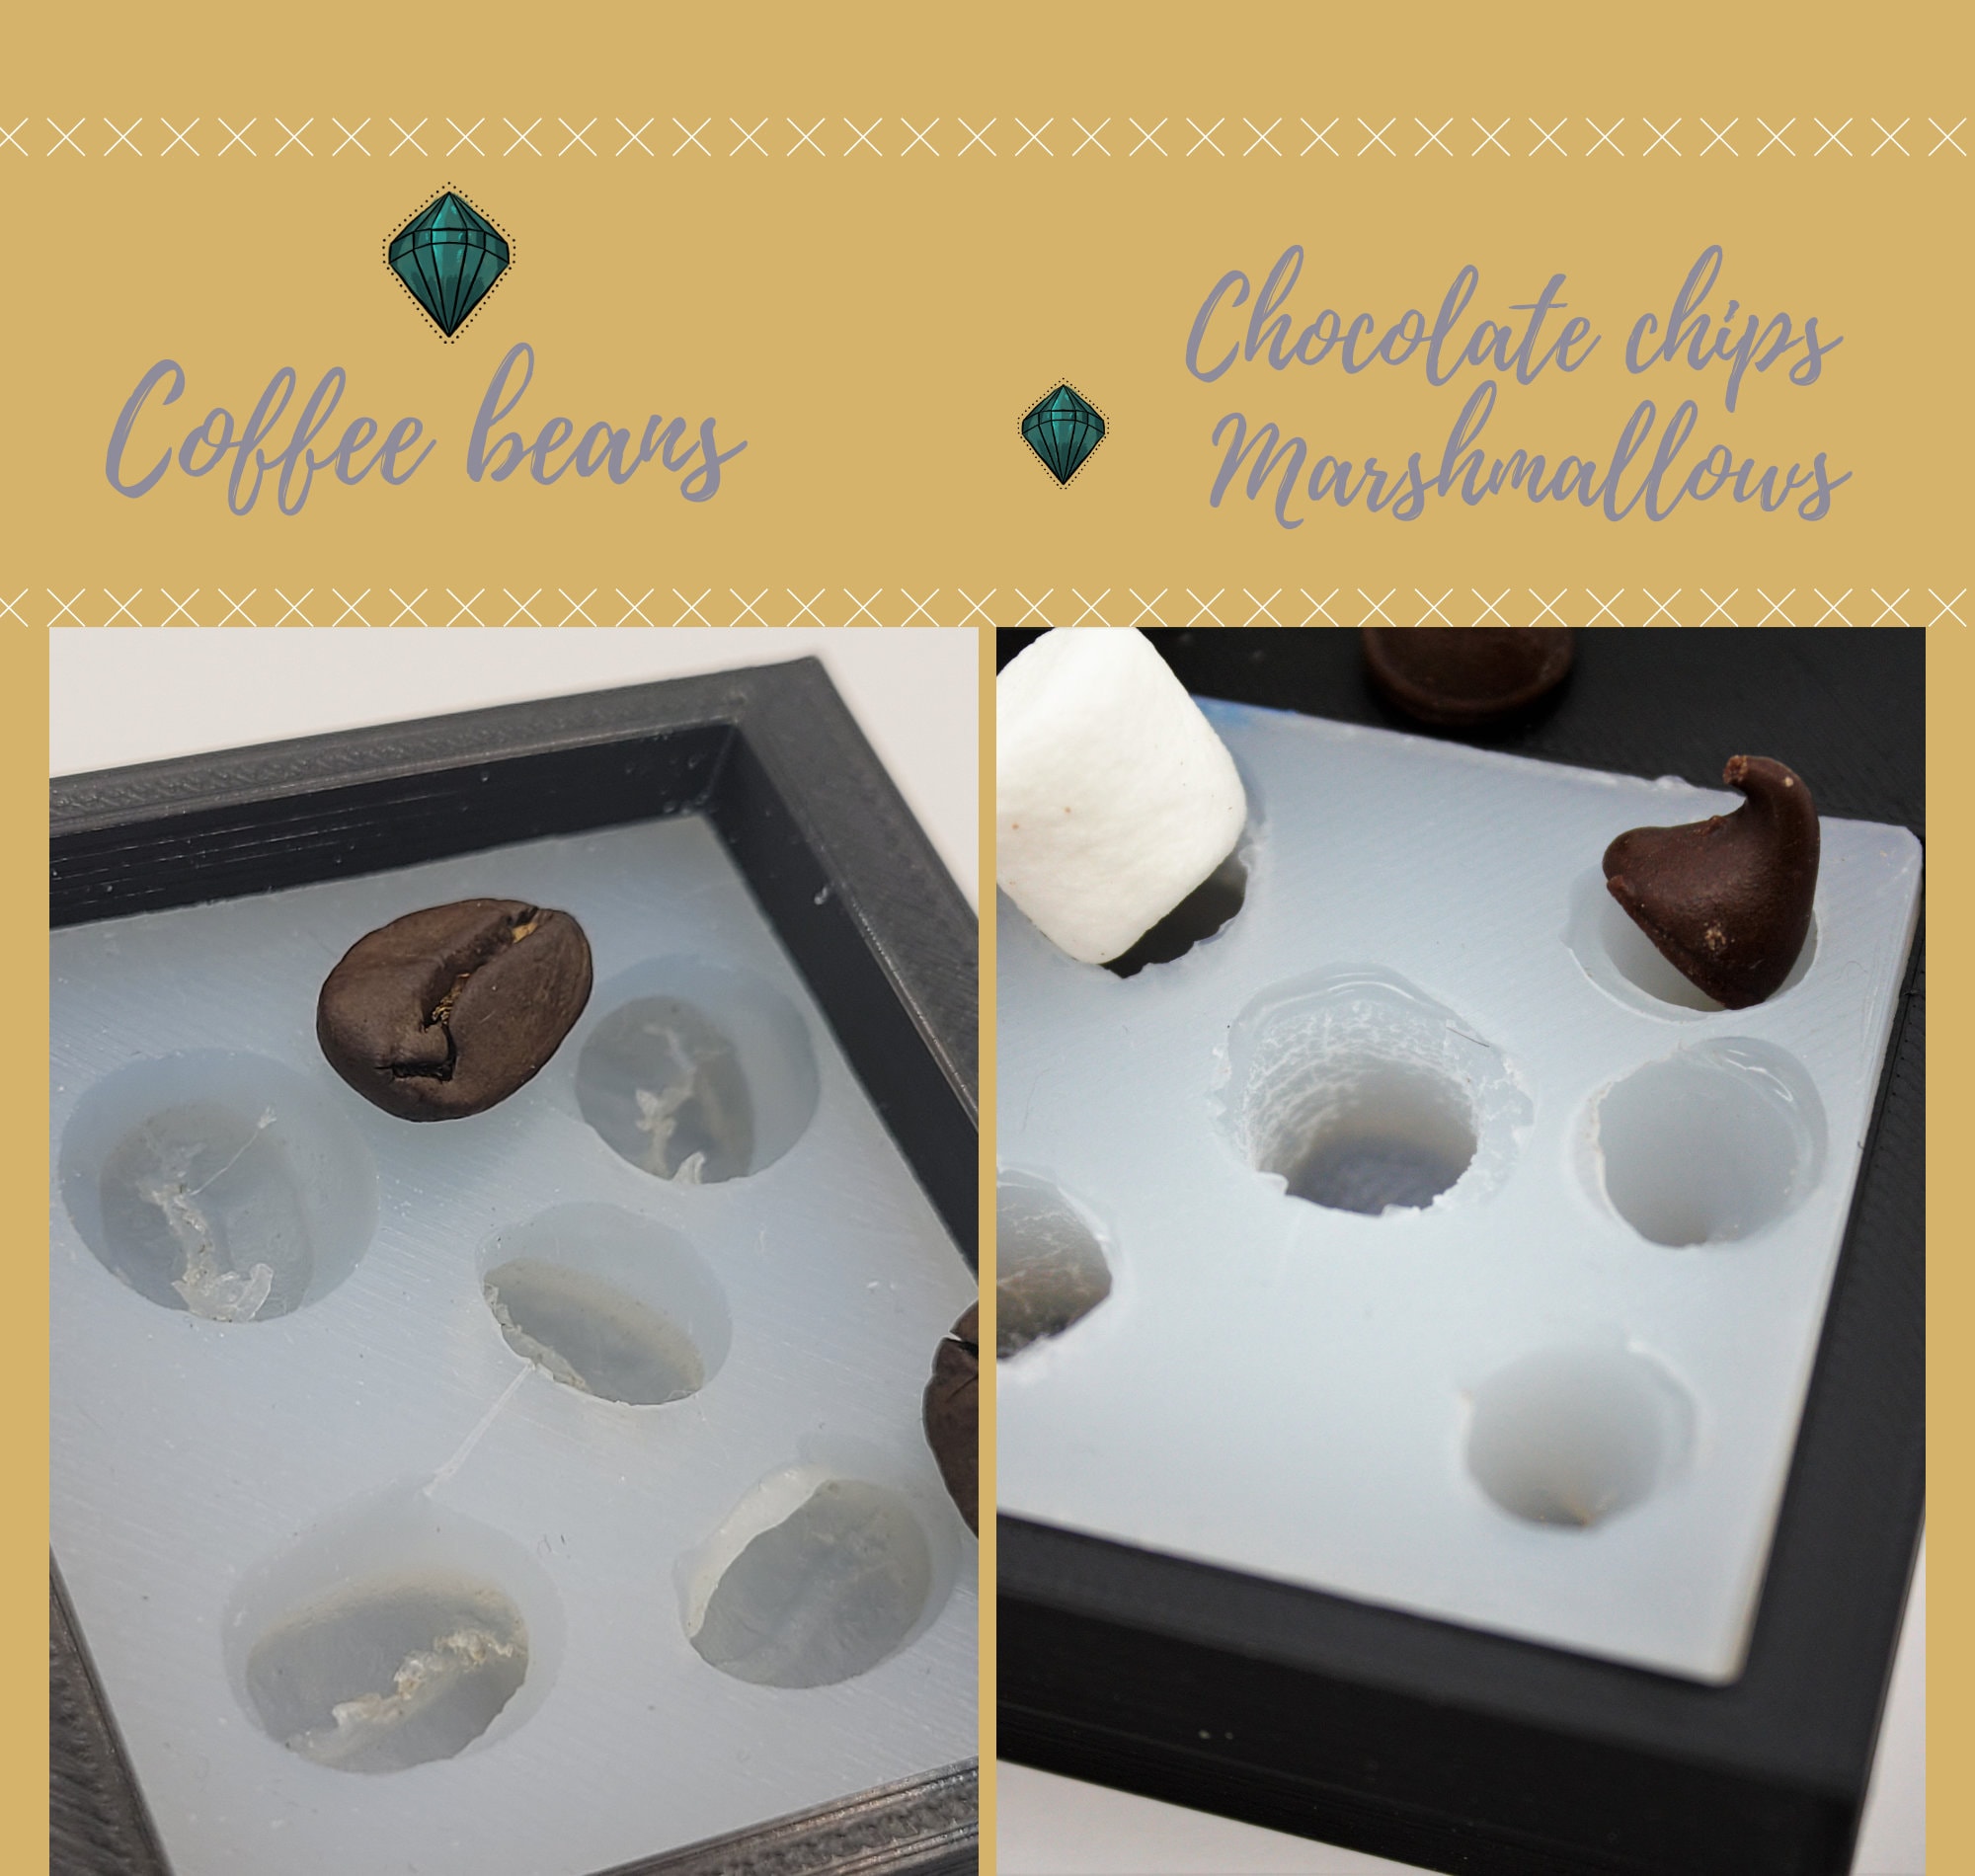 .com: Large Chocolate Chip Mold Silicone 3 Pack - Kisses Shaped  Silicone Molds ~ Big Chocolate Kiss Shape - Make 75 Kisses with These Candy  Molds ~ Make Non Dairy & Sugar Organic : Home & Kitchen